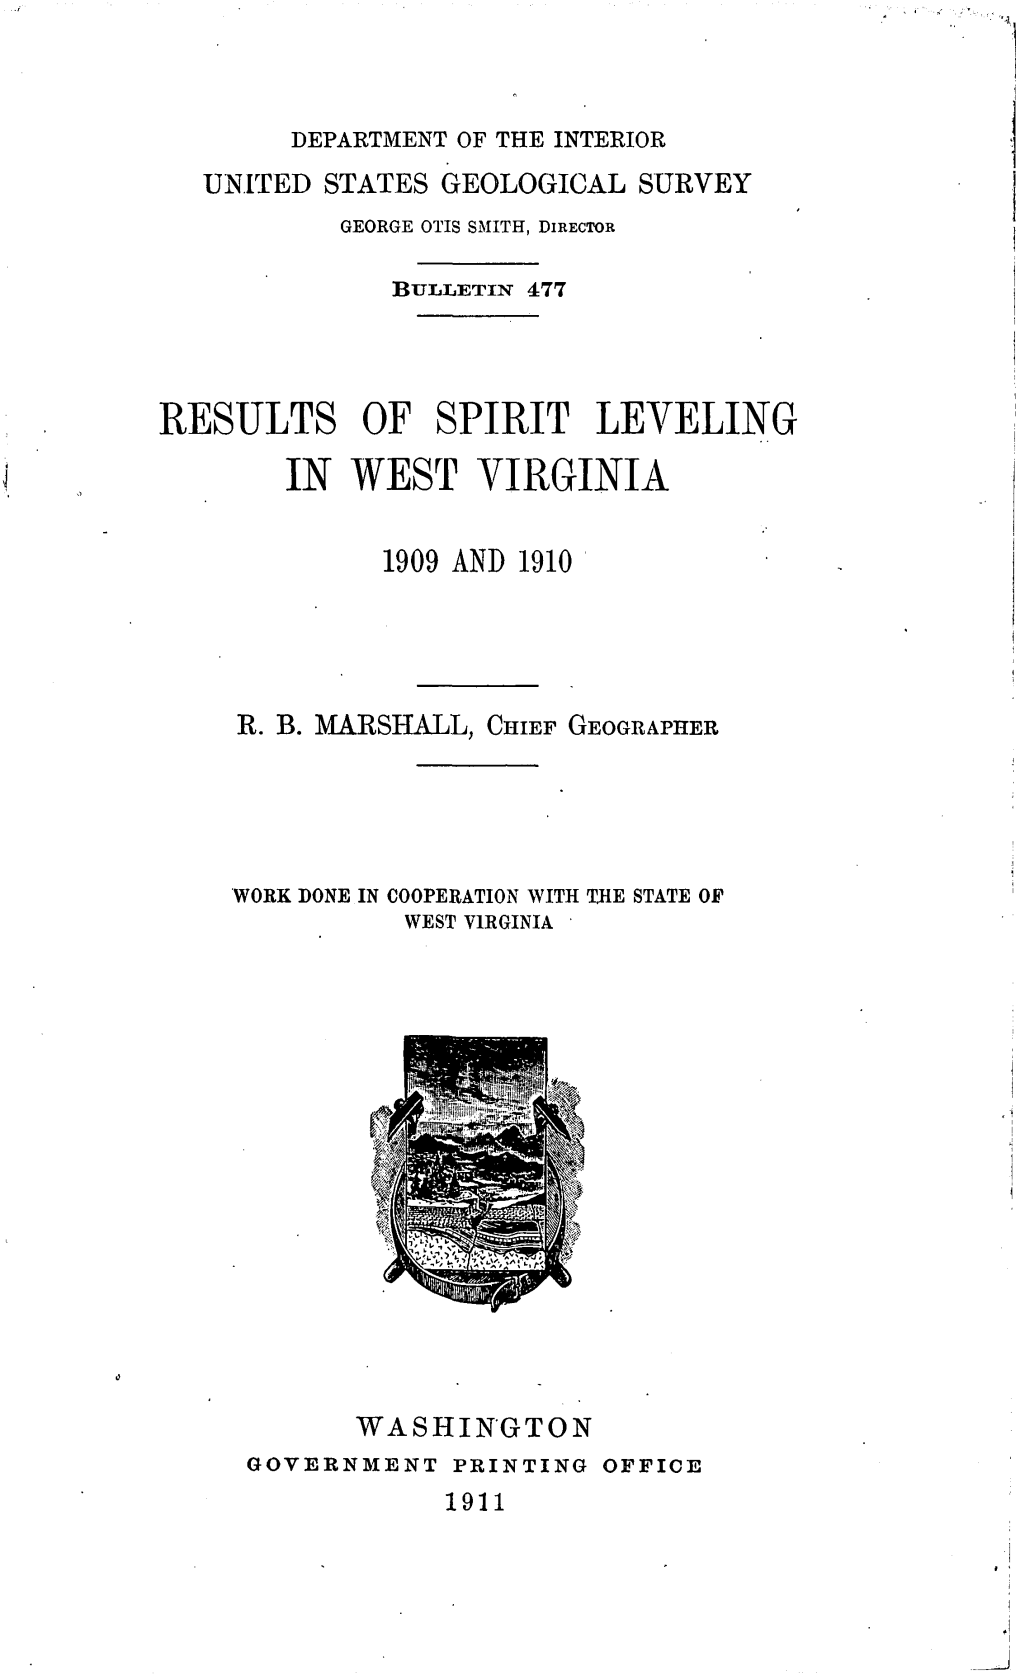 Results of Spirit Leveling in West Virginia